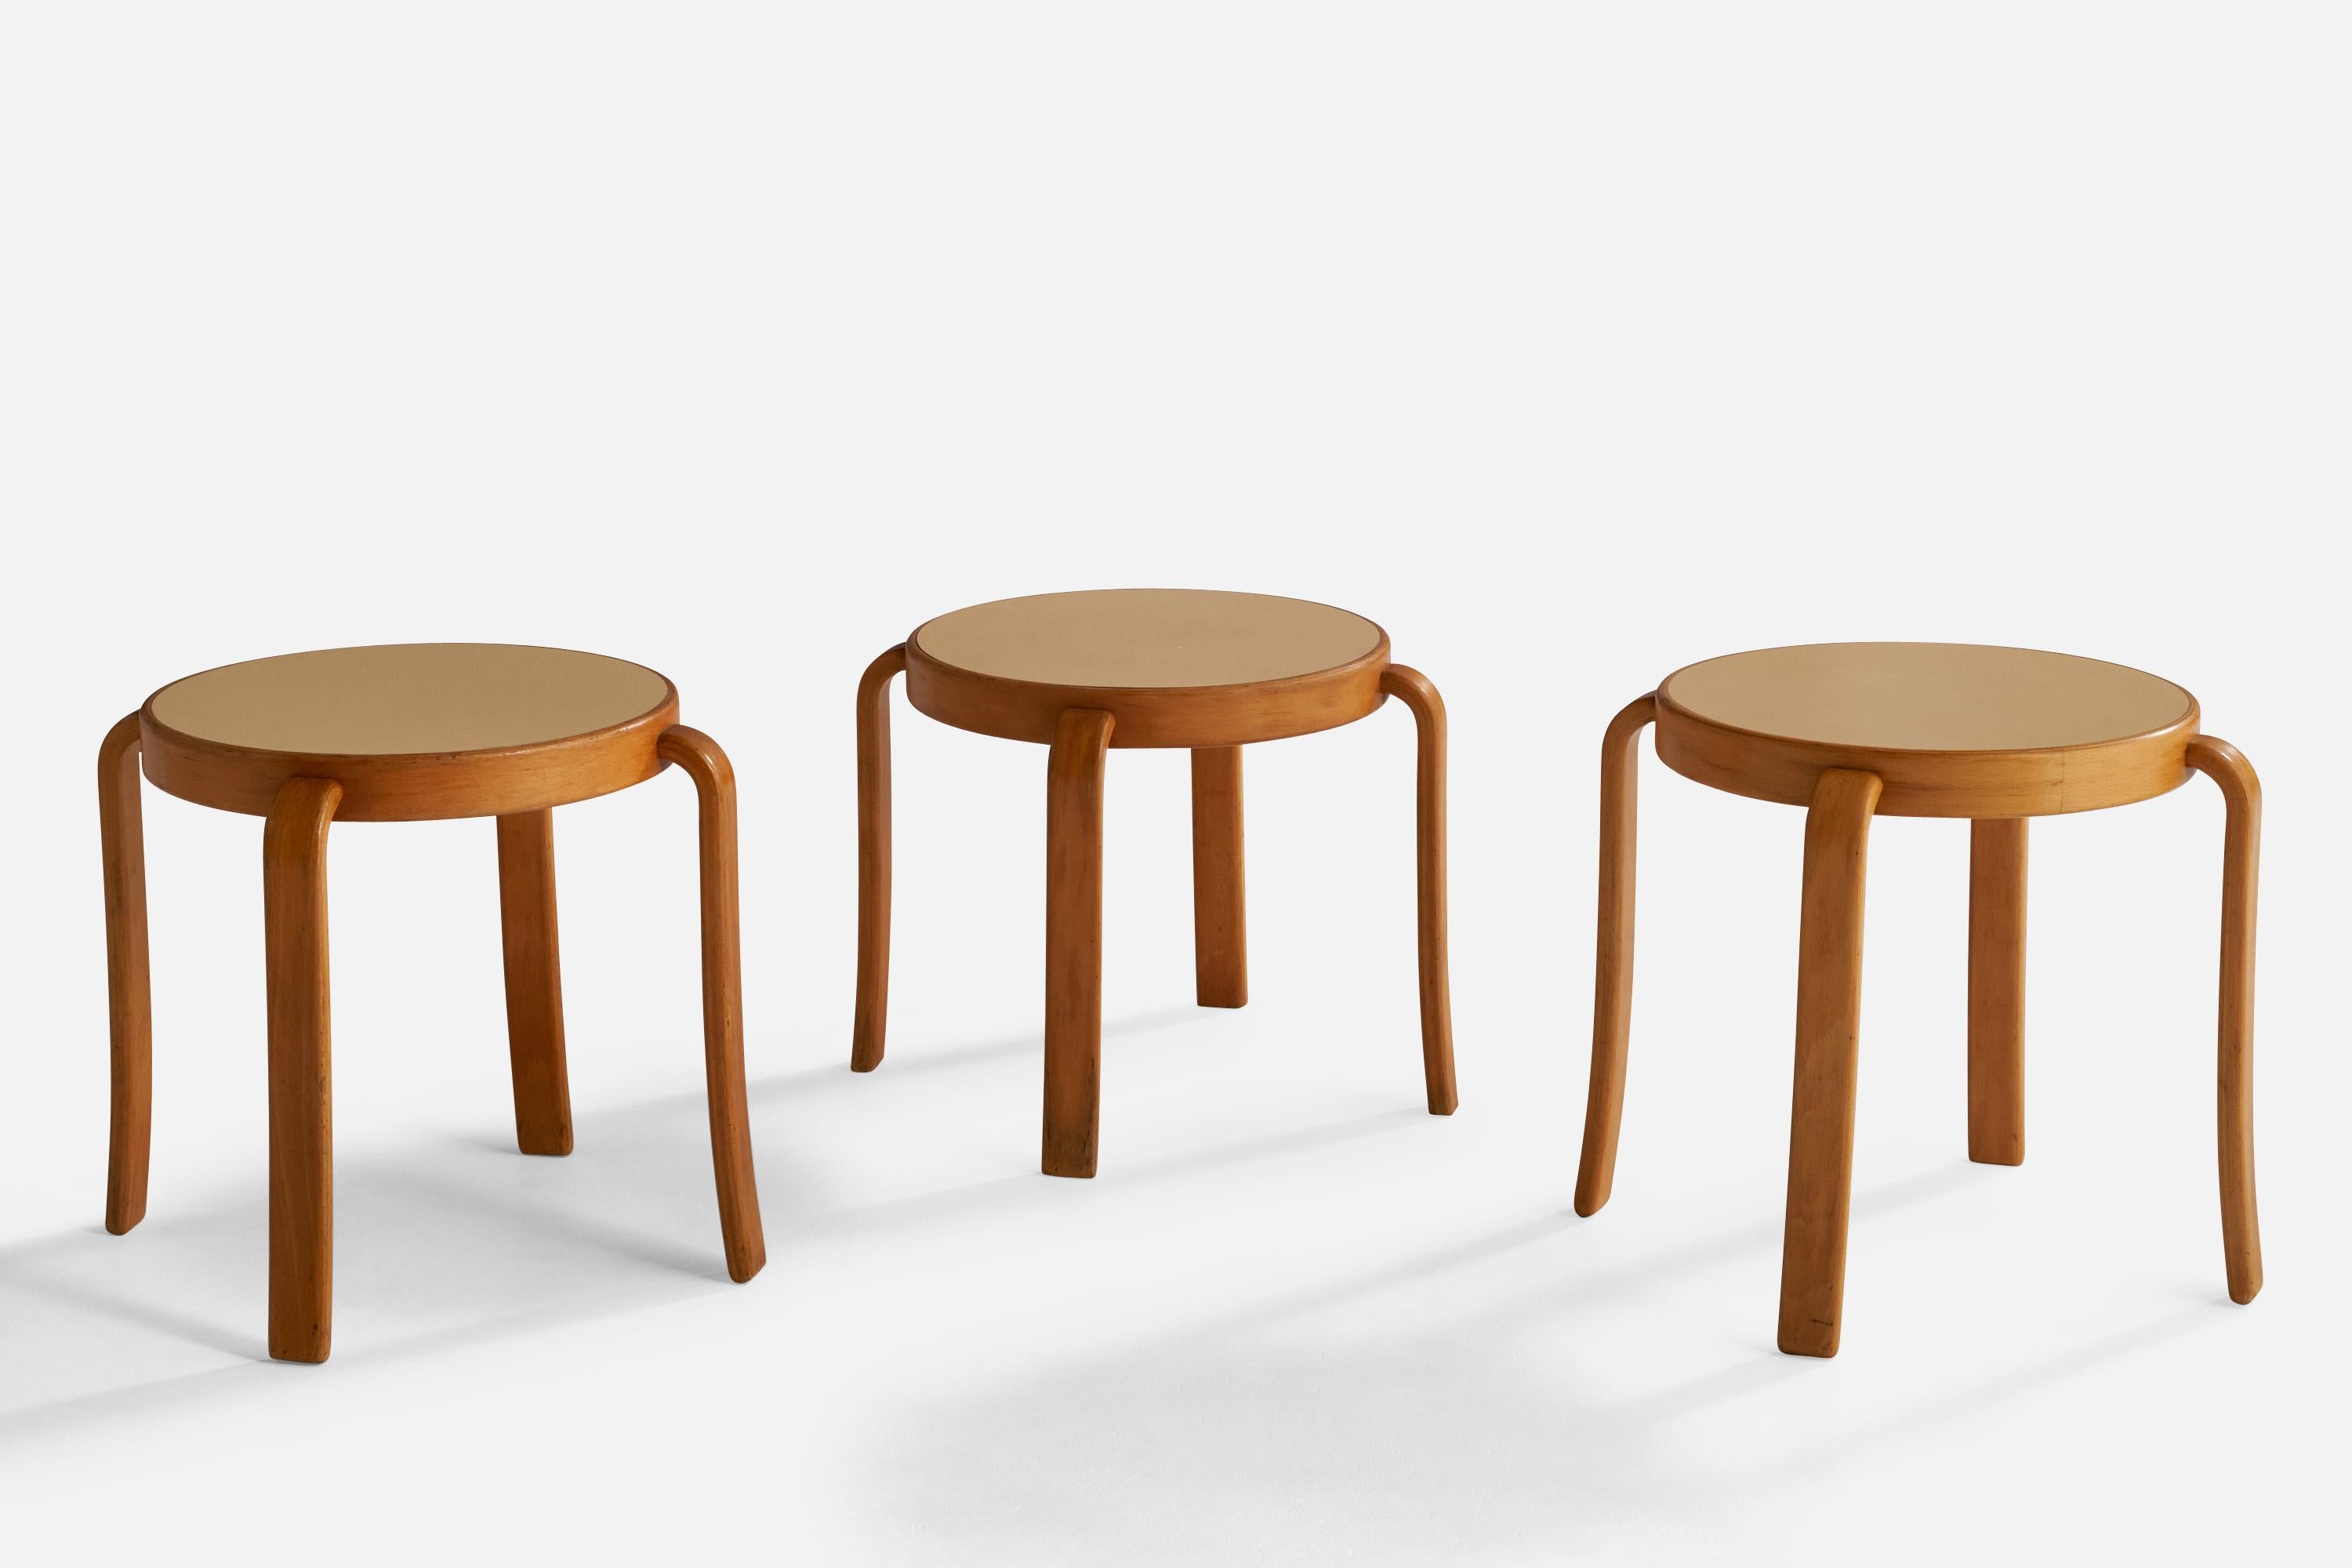 A set of three oak and beige laminate stools designed by Rud Thygesen and Johnny Sørensen and produced by Magnus Olesen, Denmark, 1960s.

Dimensions of shorter piece: 15.5” H x 20.55” W x 20.55” D